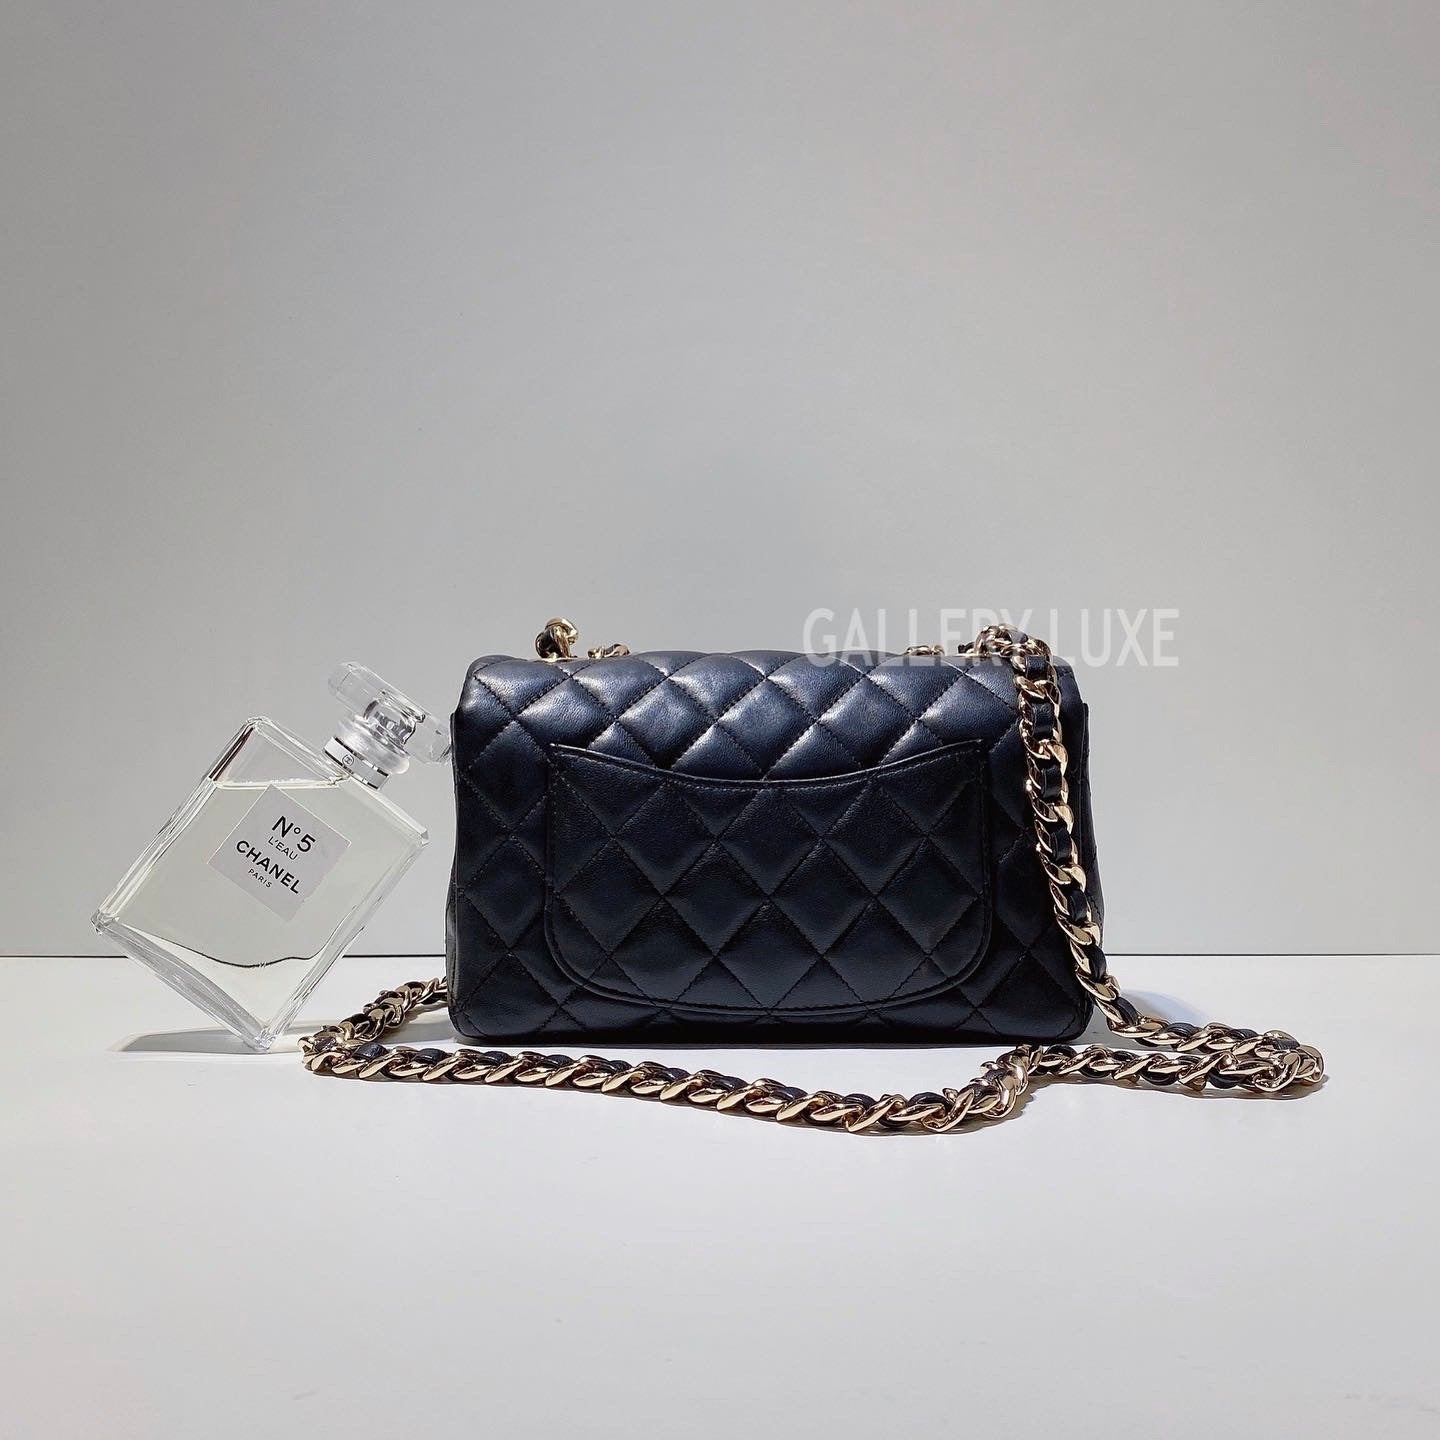 No.3300-Chanel Lambskin Coco Charm Mini Flap Bag 20cm – Gallery Luxe